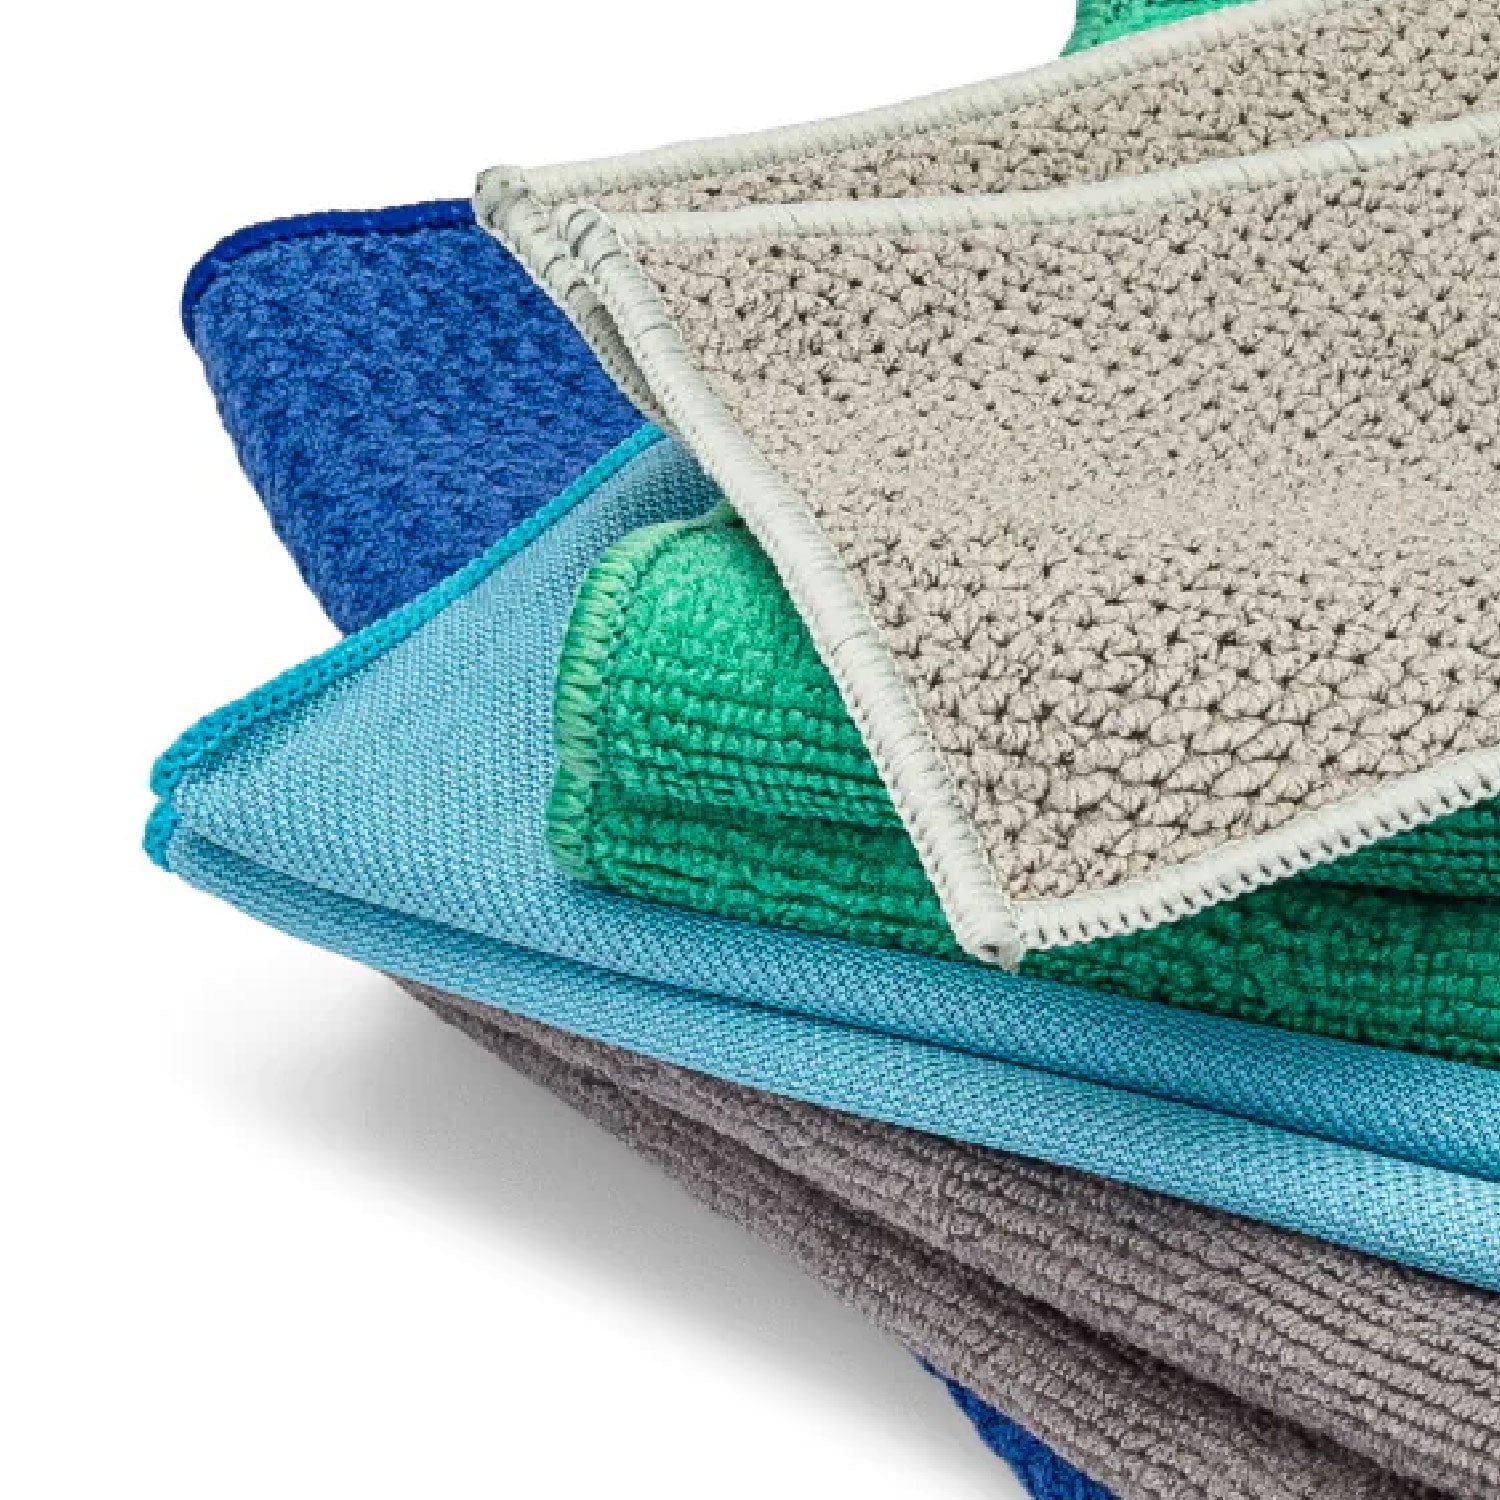 Variety Pack Of Microfiber Towels - Best Household Cleaning Cloths